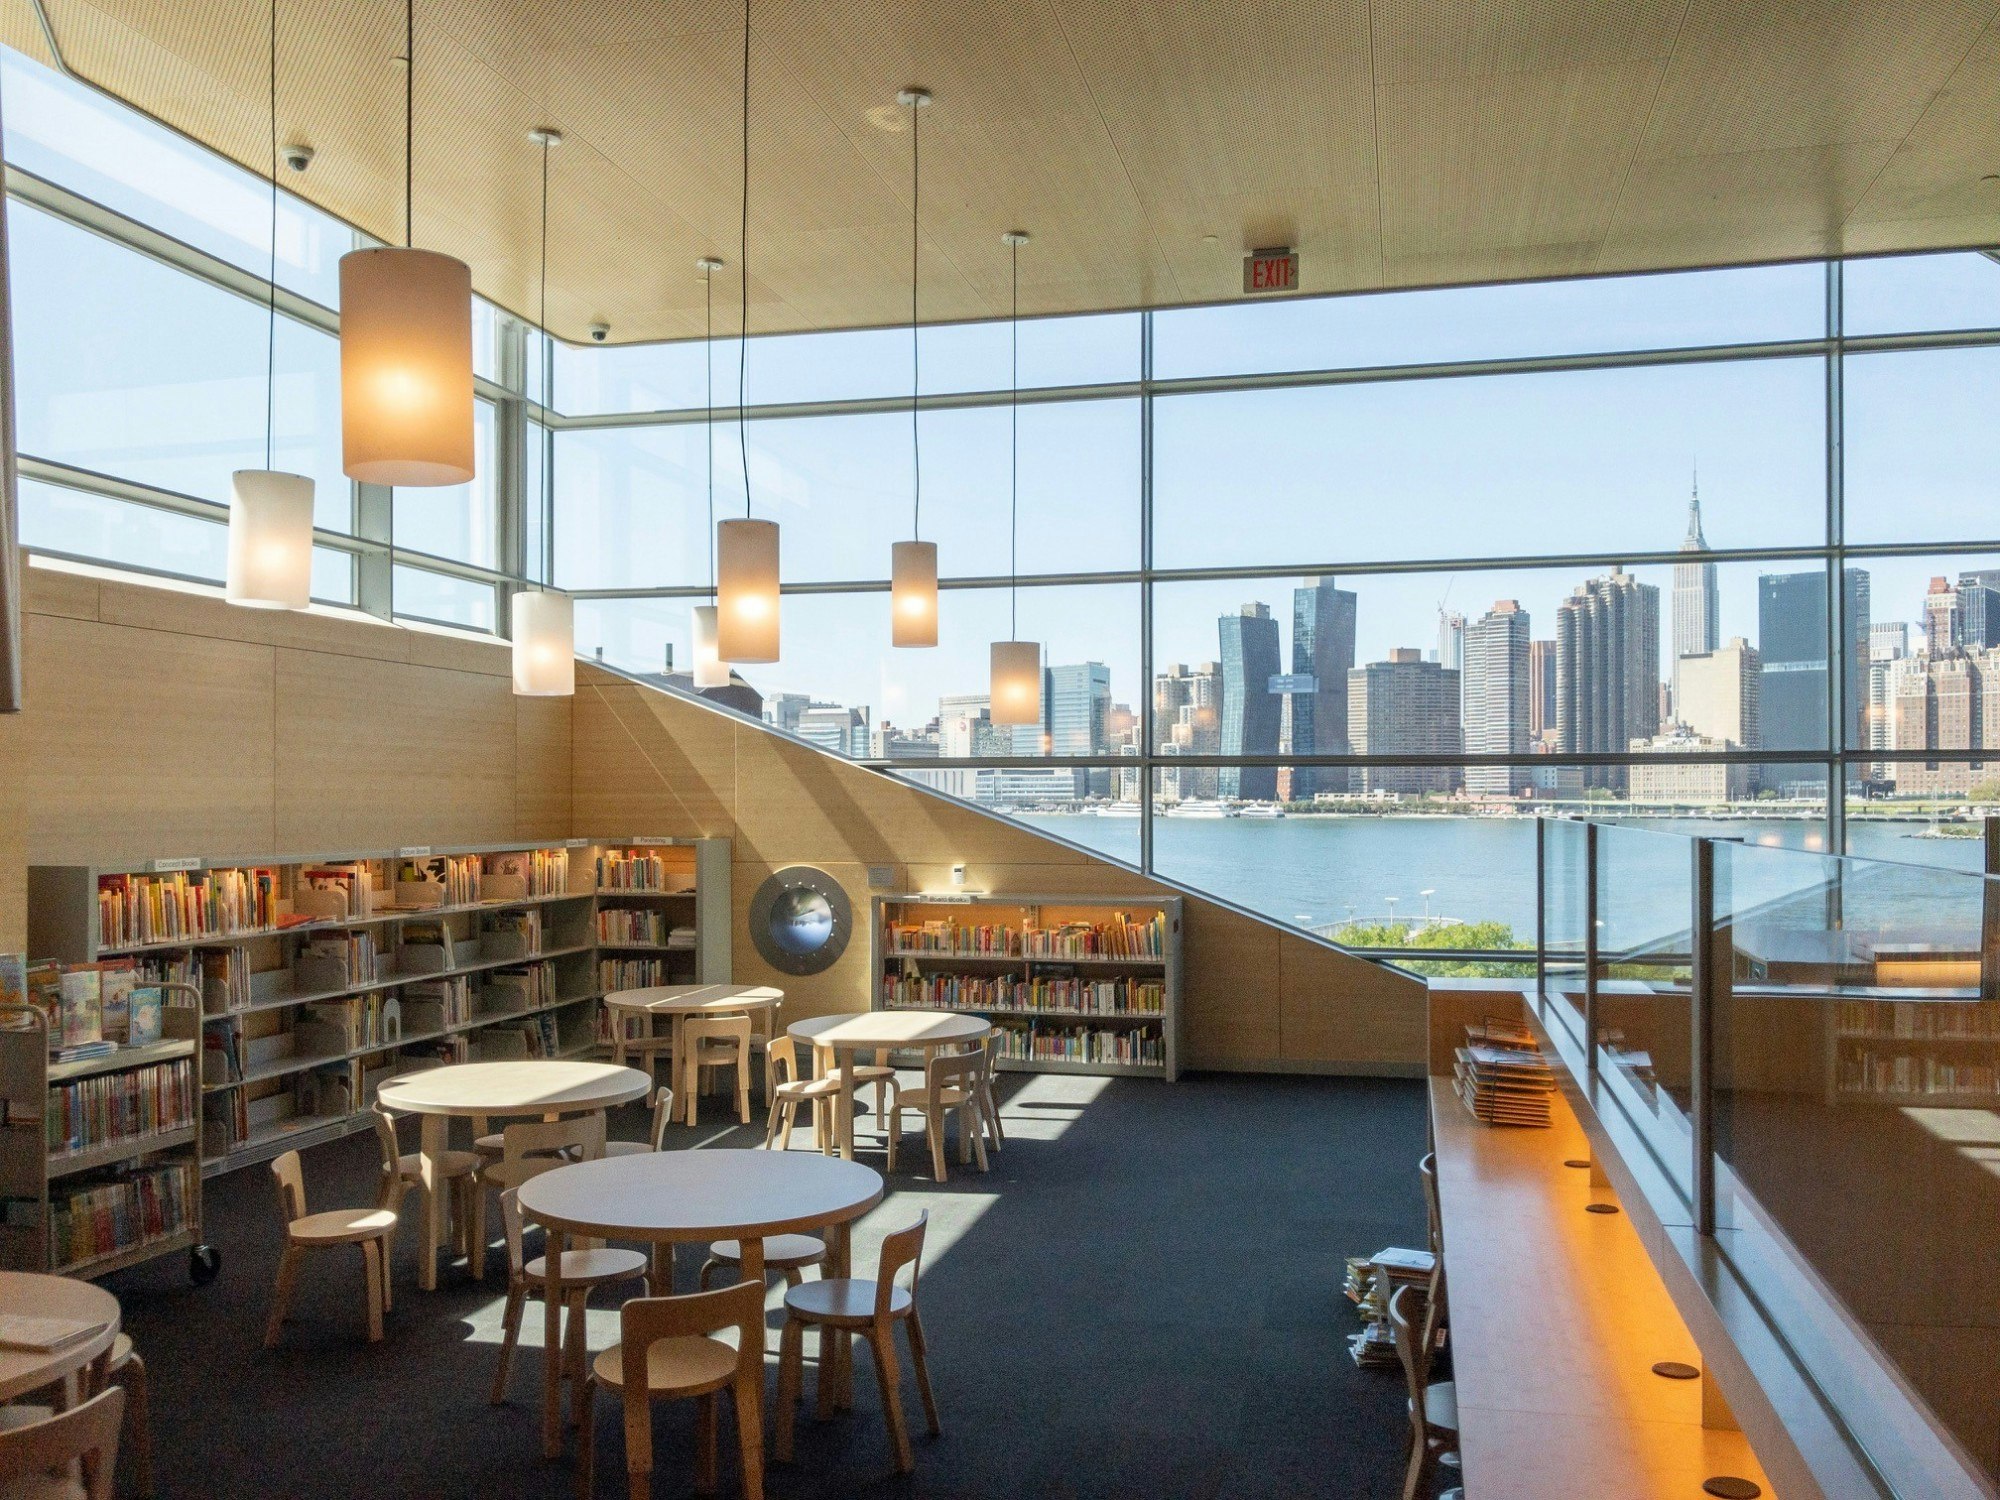 The interior of Hunters Point Community Library in New York complete with books and seating